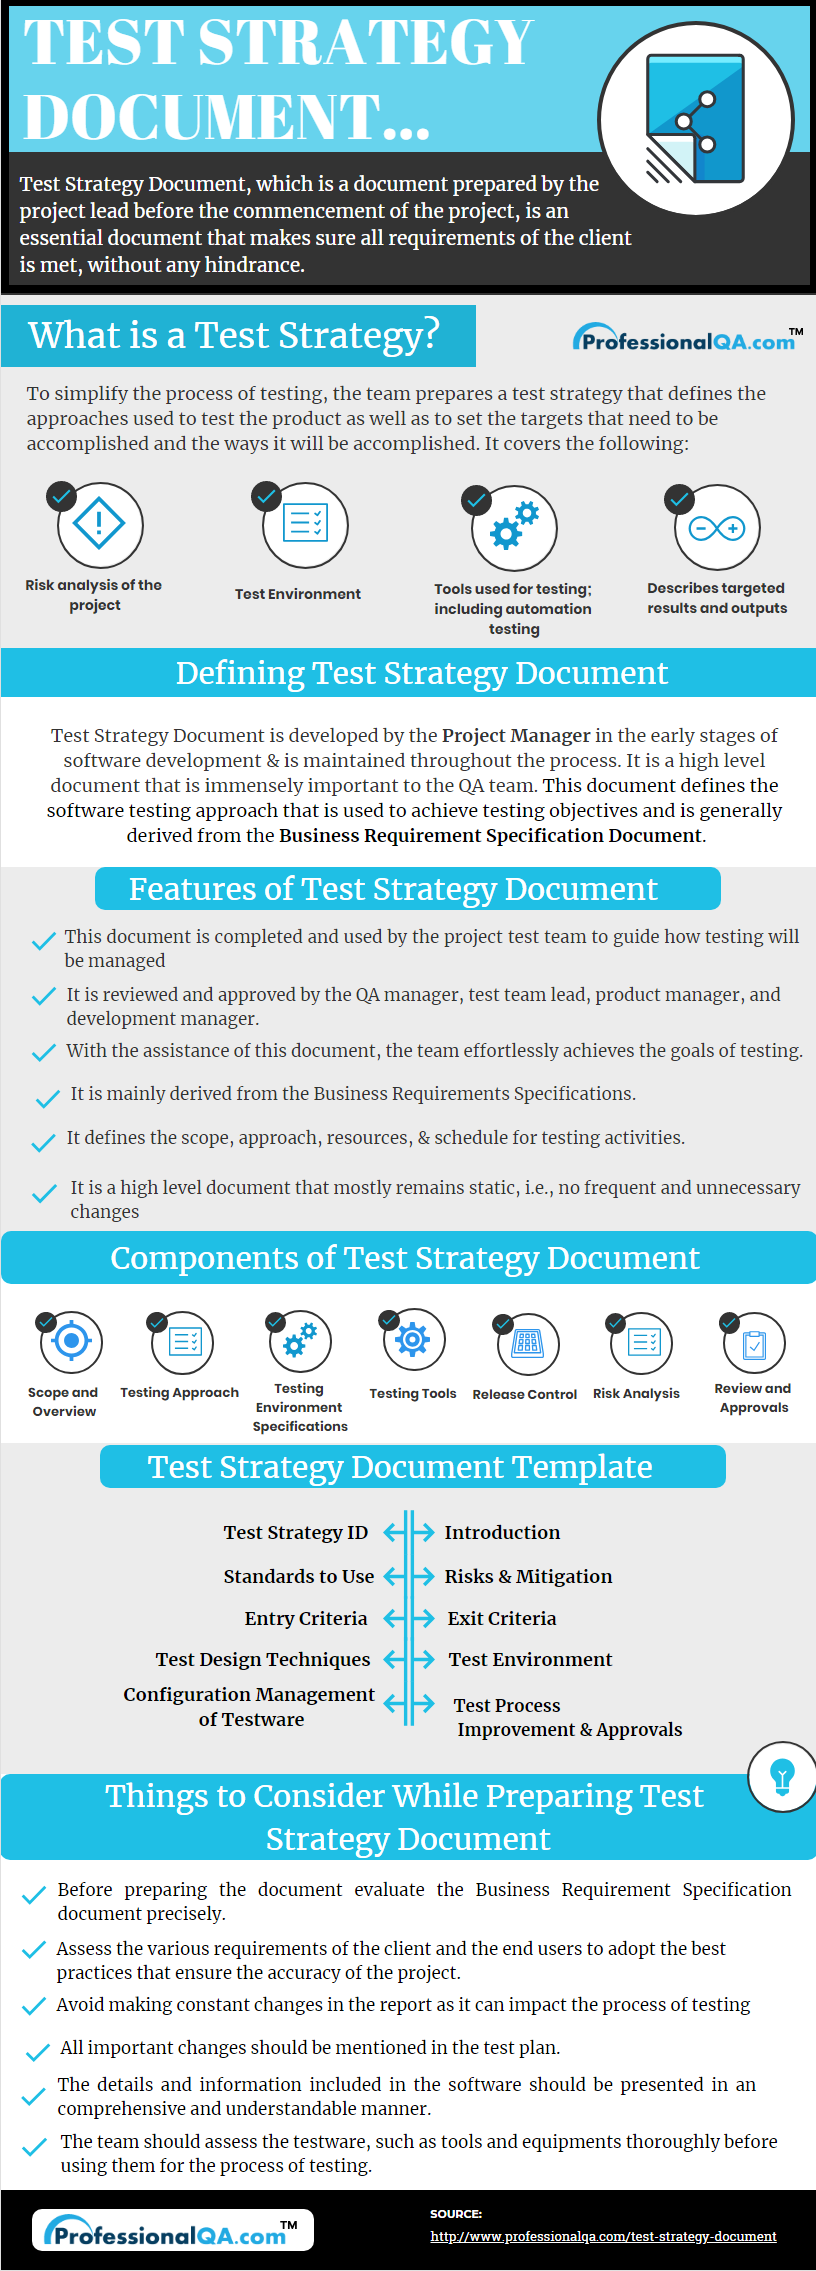 Test Strategy Document infographics